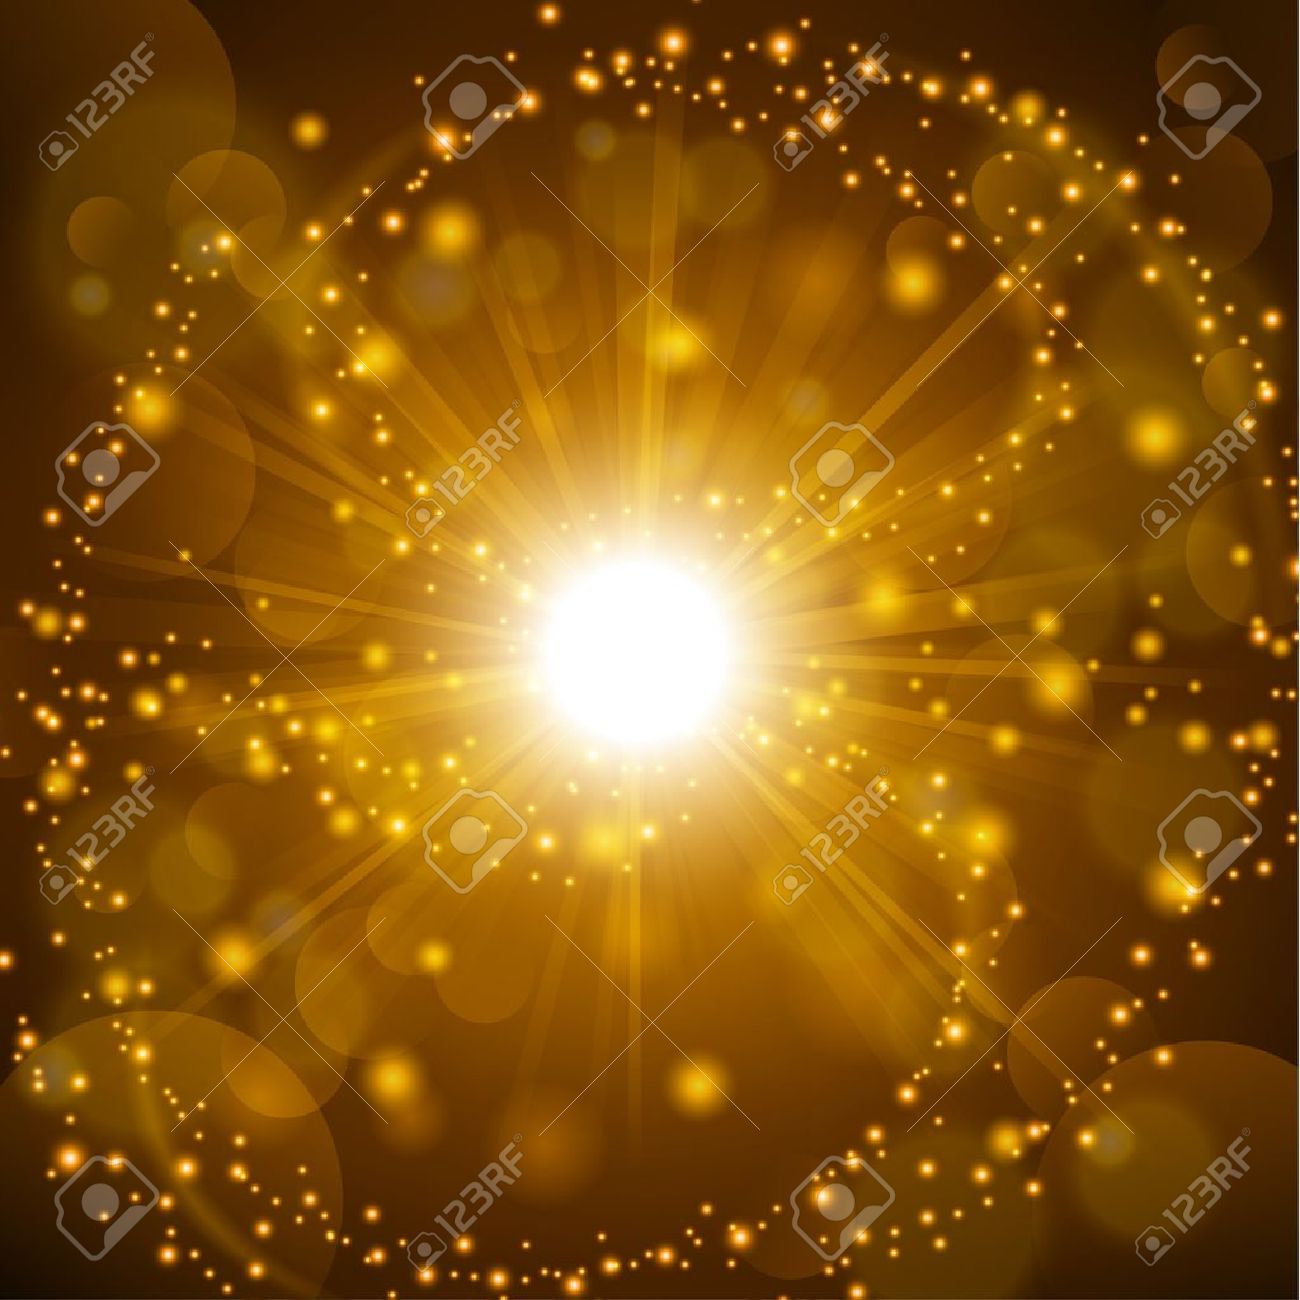 Golden Shine With Lens Flare Background Royalty Cliparts